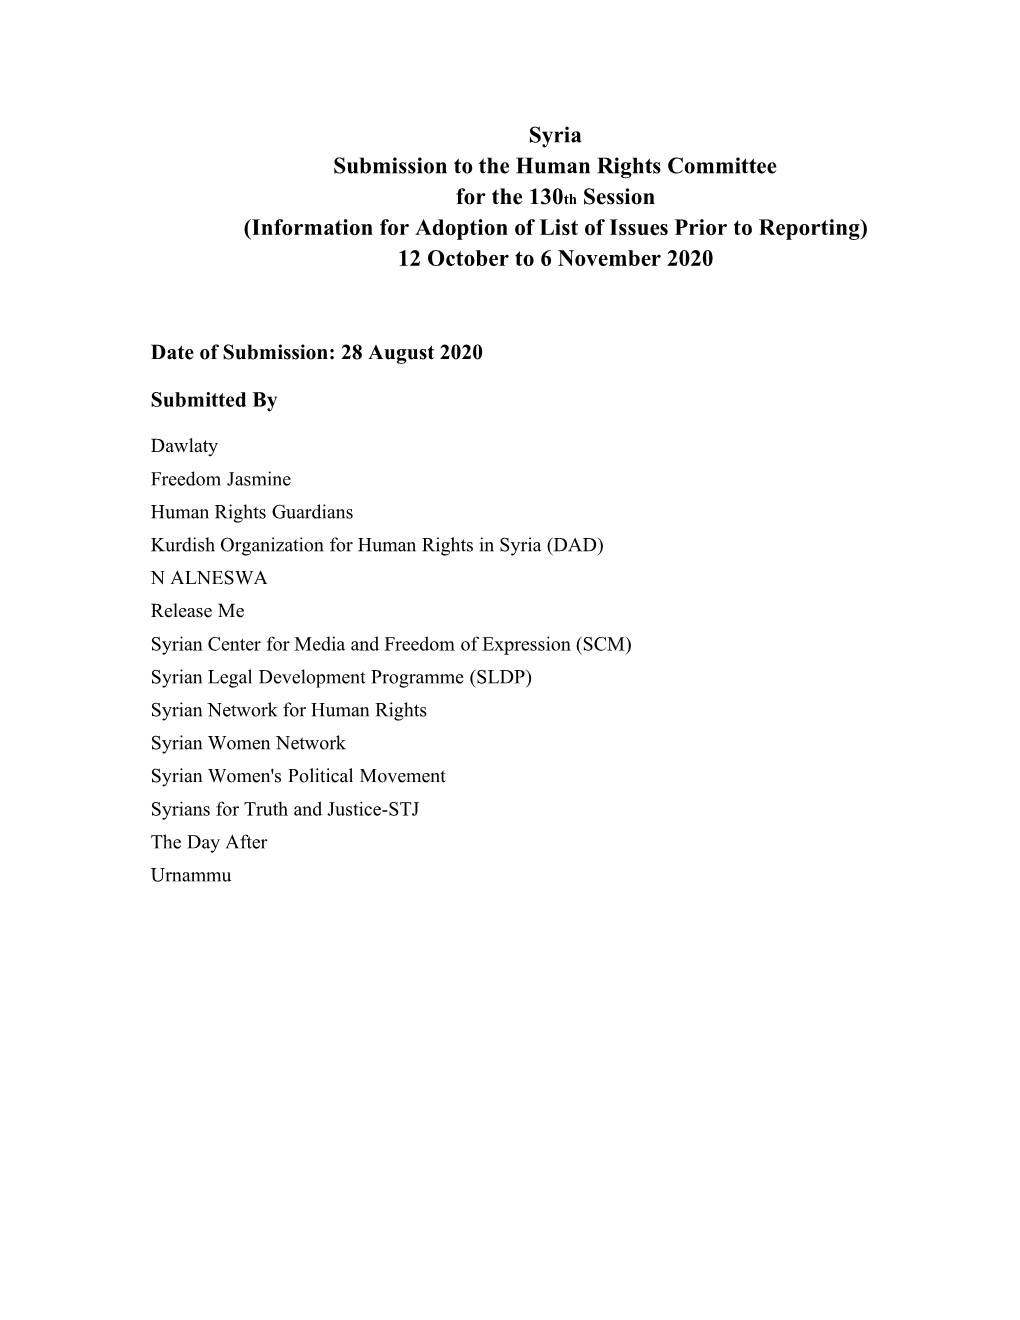 Syria Submission to the Human Rights Committee for the 130Th Session (Information for Adoption of List of Issues Prior to Reporting) 12 October to 6 November 2020